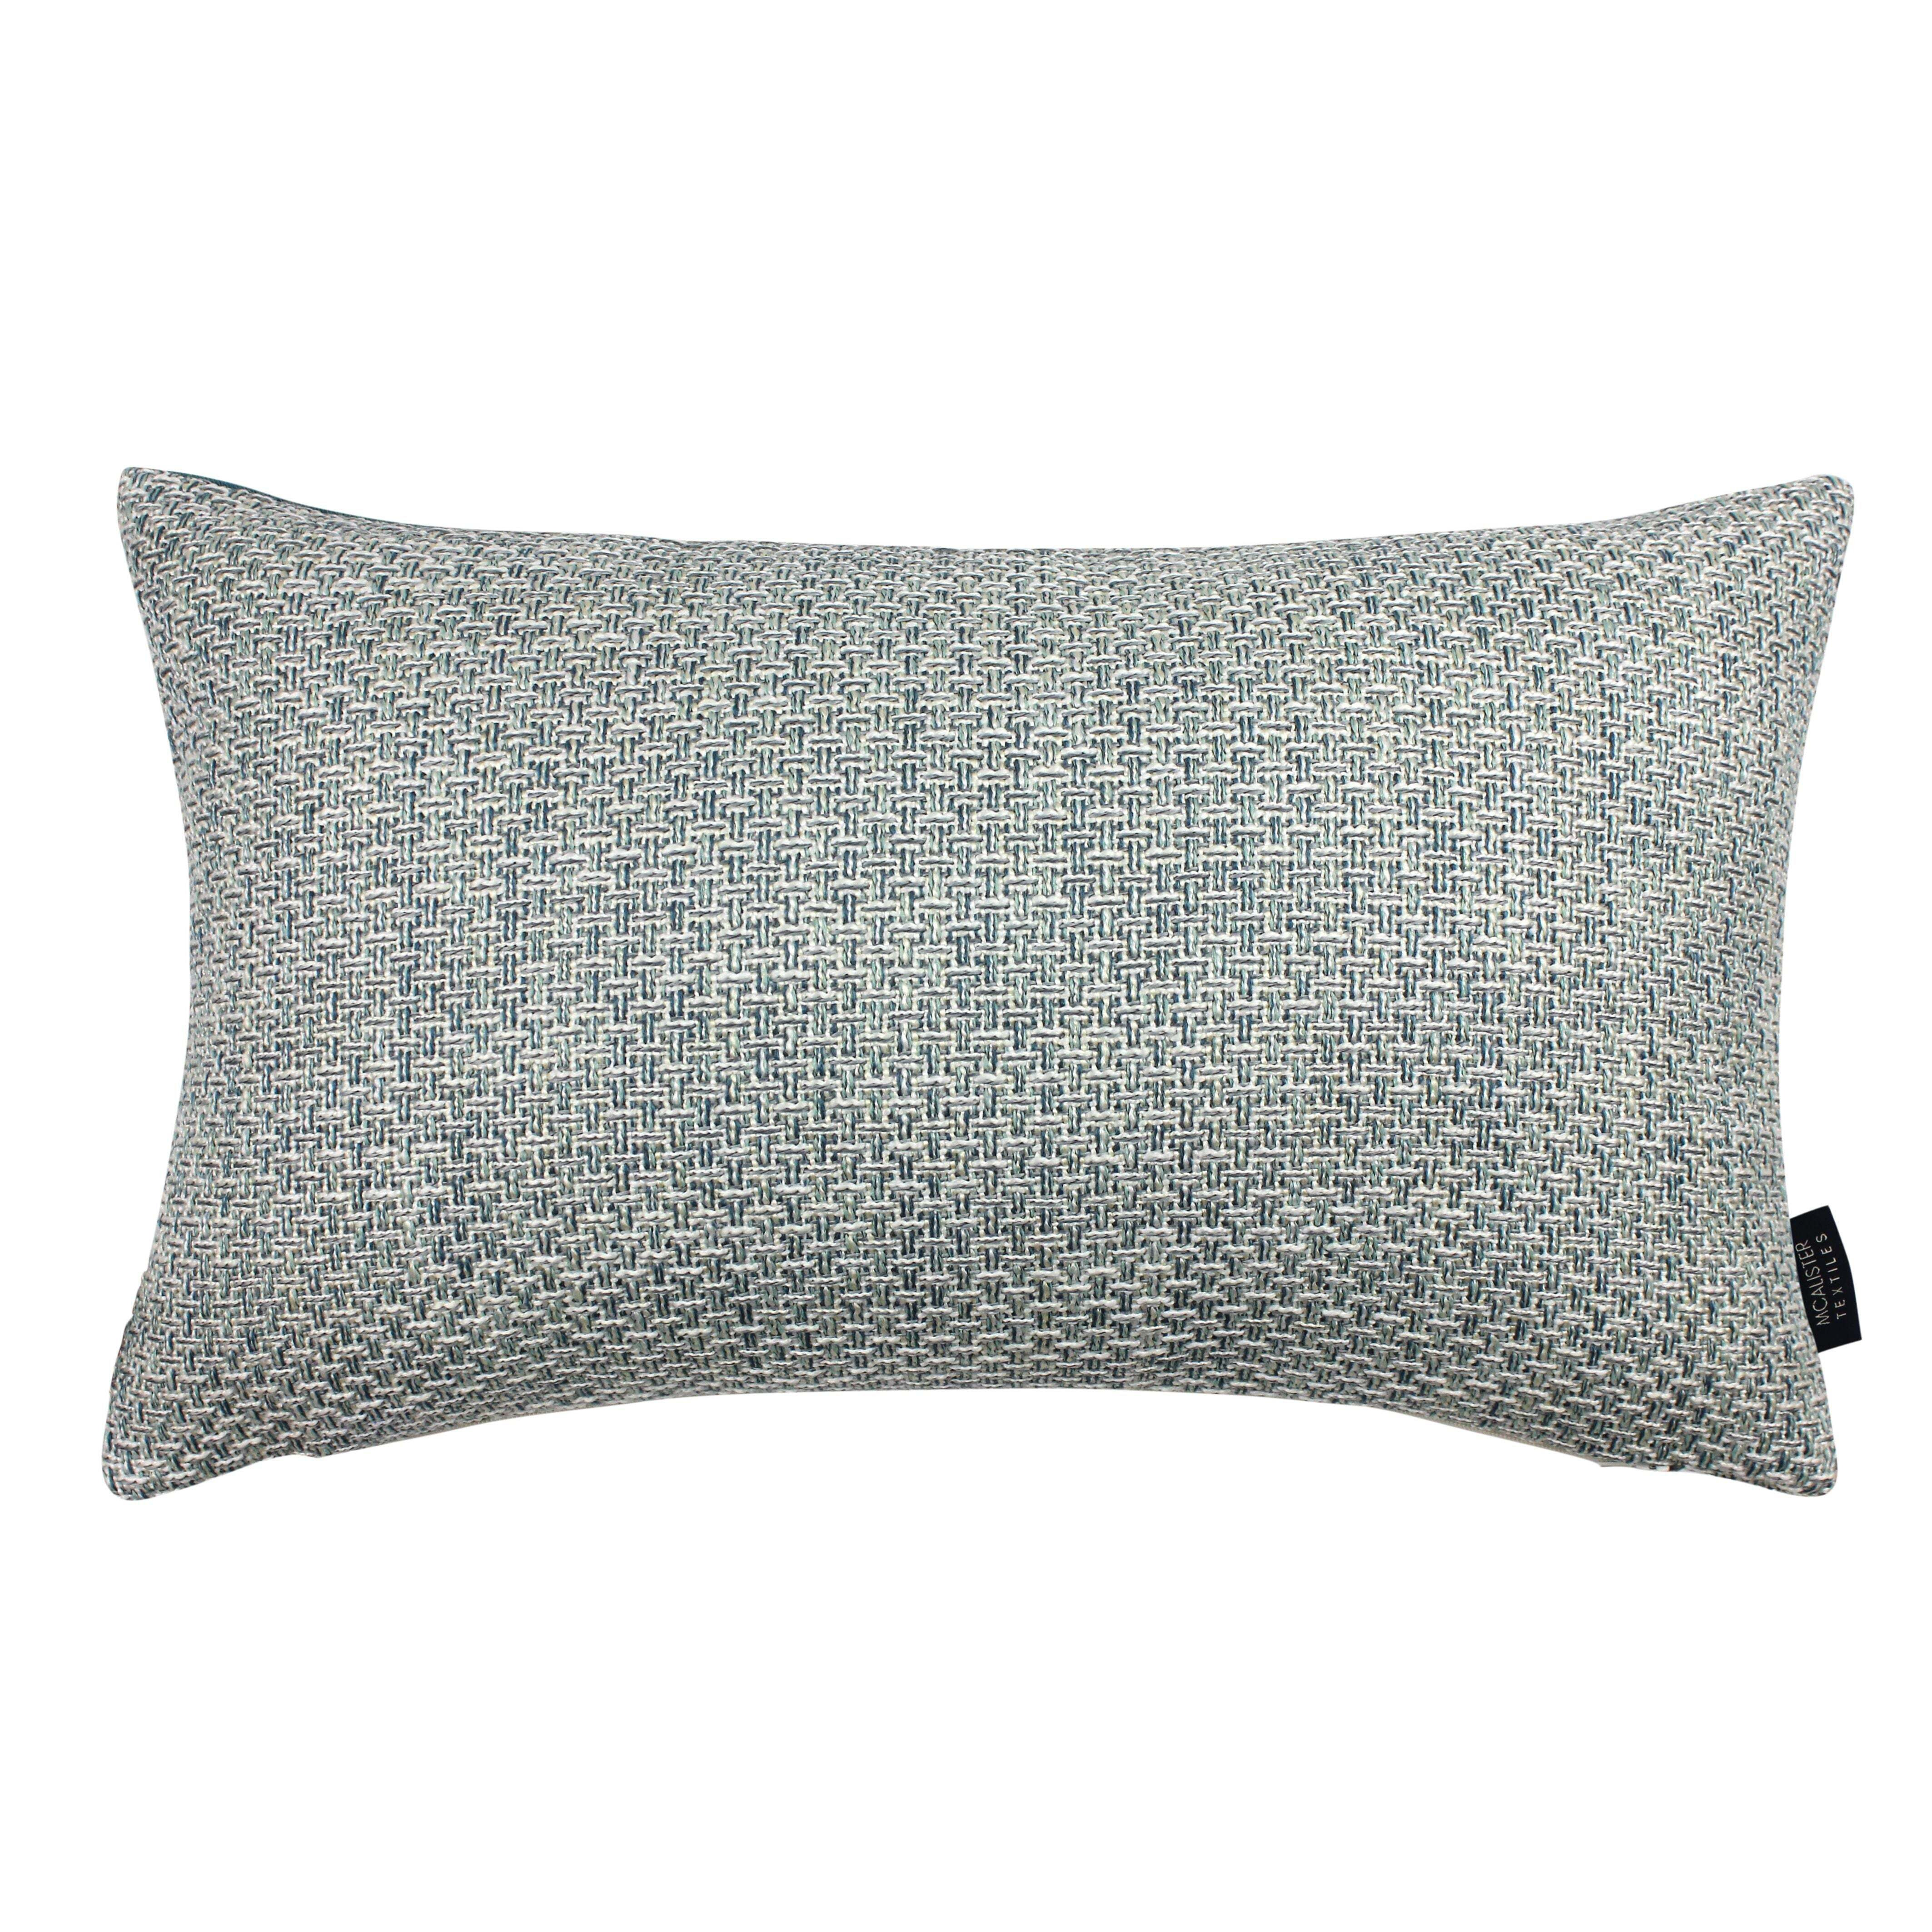 Skye Tweed Pillow - Teal, Cover Only / 50cm x 30cm